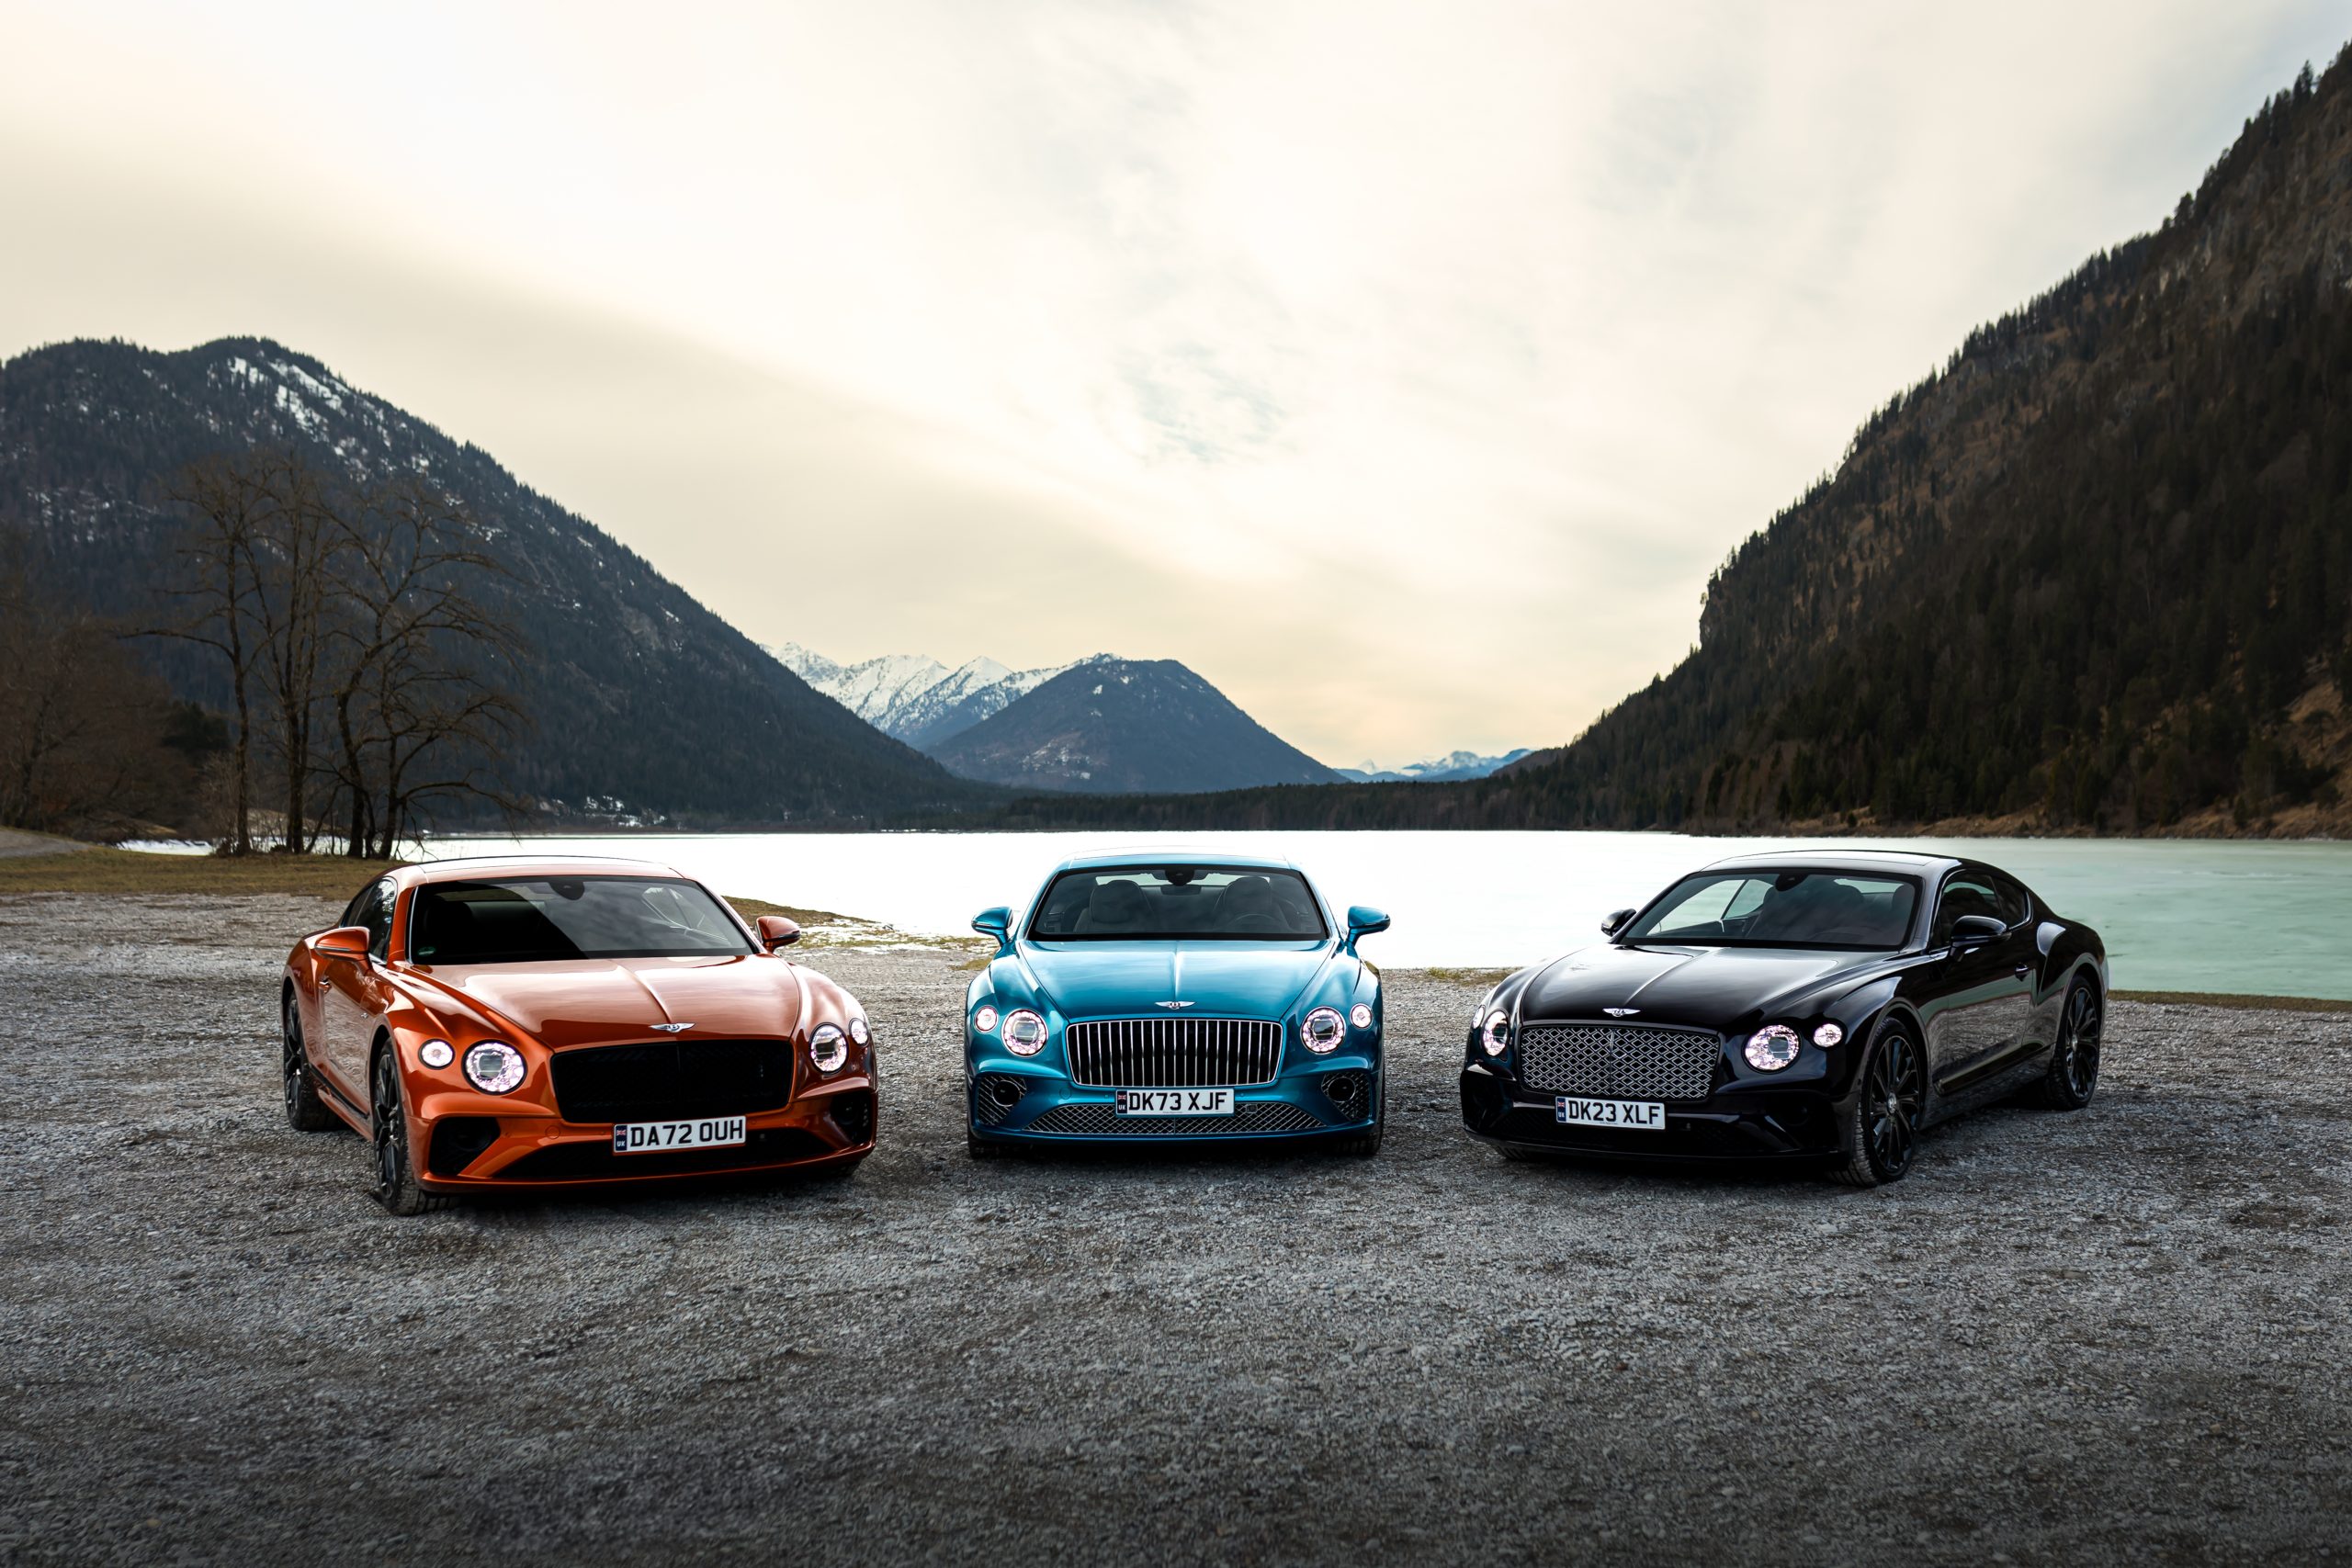 Bentley Continental GT Wins Two Major Awards in Europe